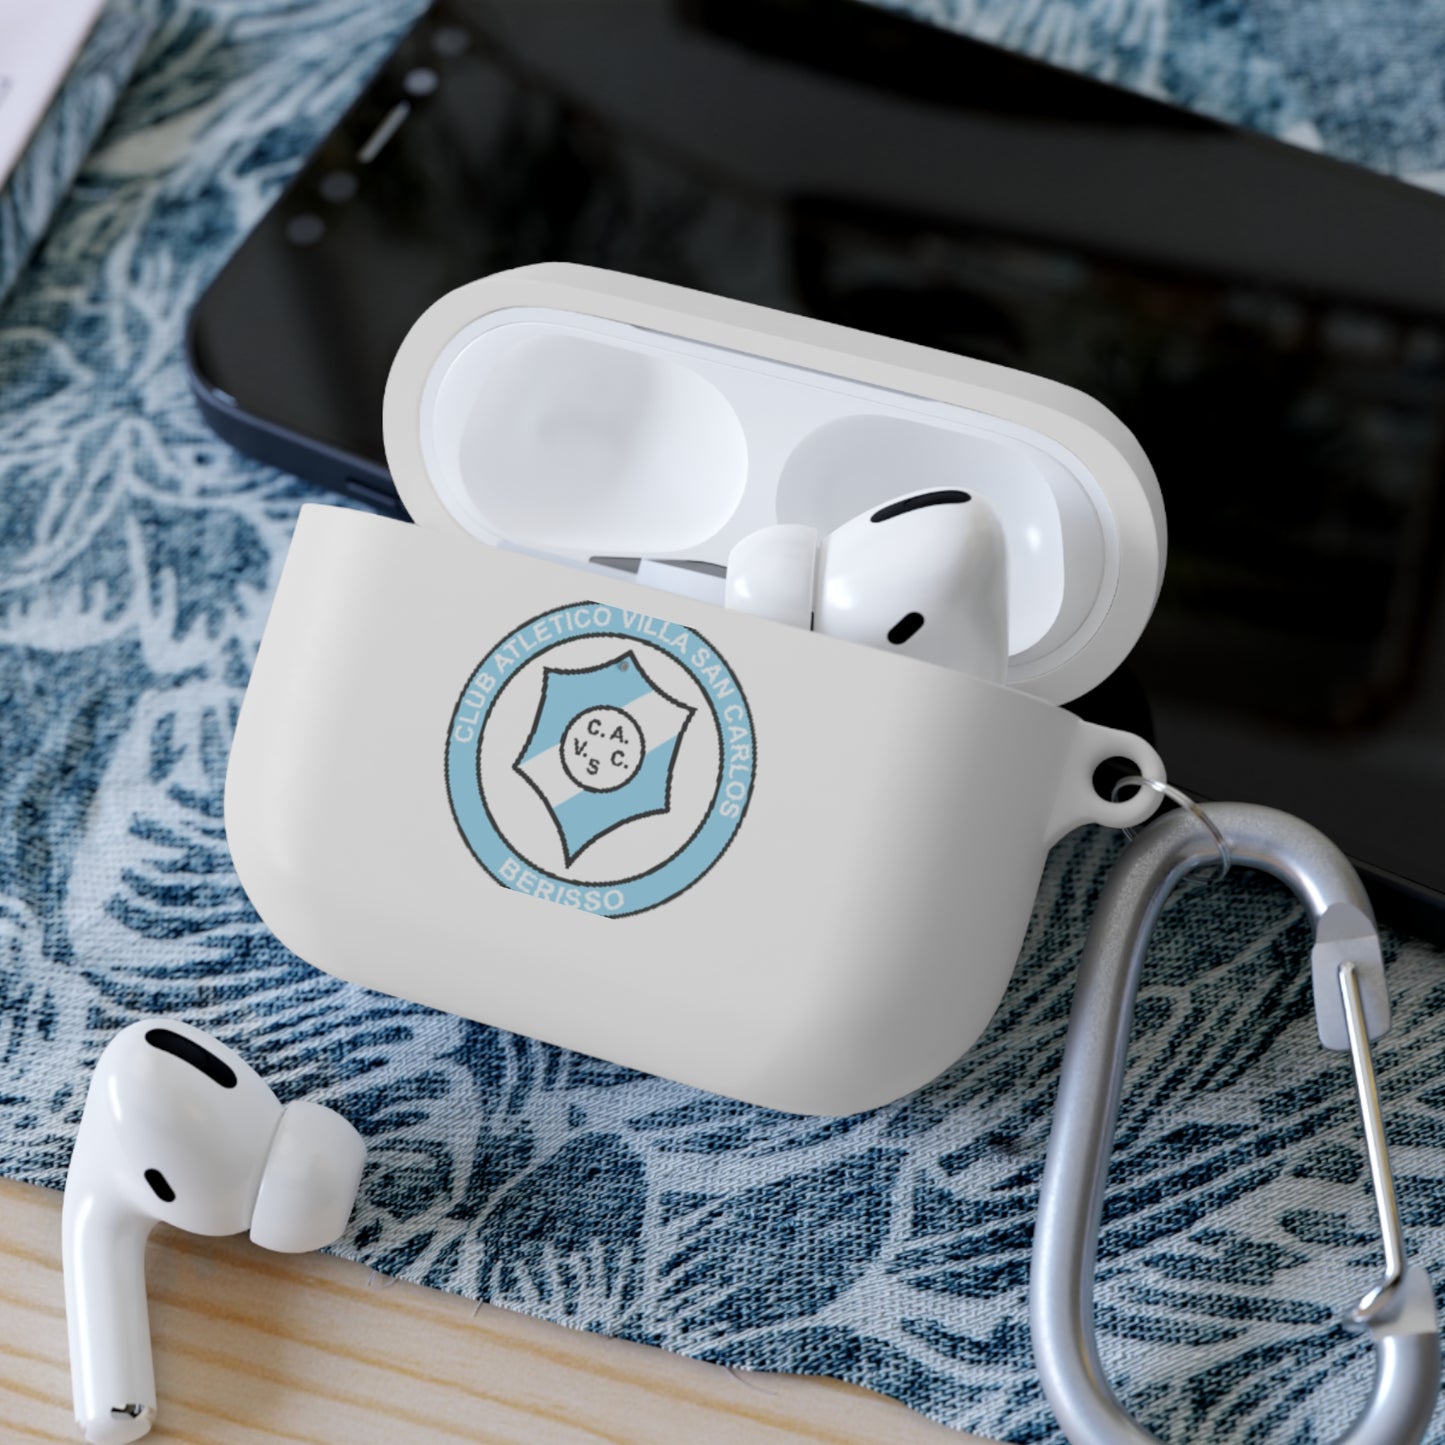 Villa San Carlos AirPods and AirPods Pro Case Cover